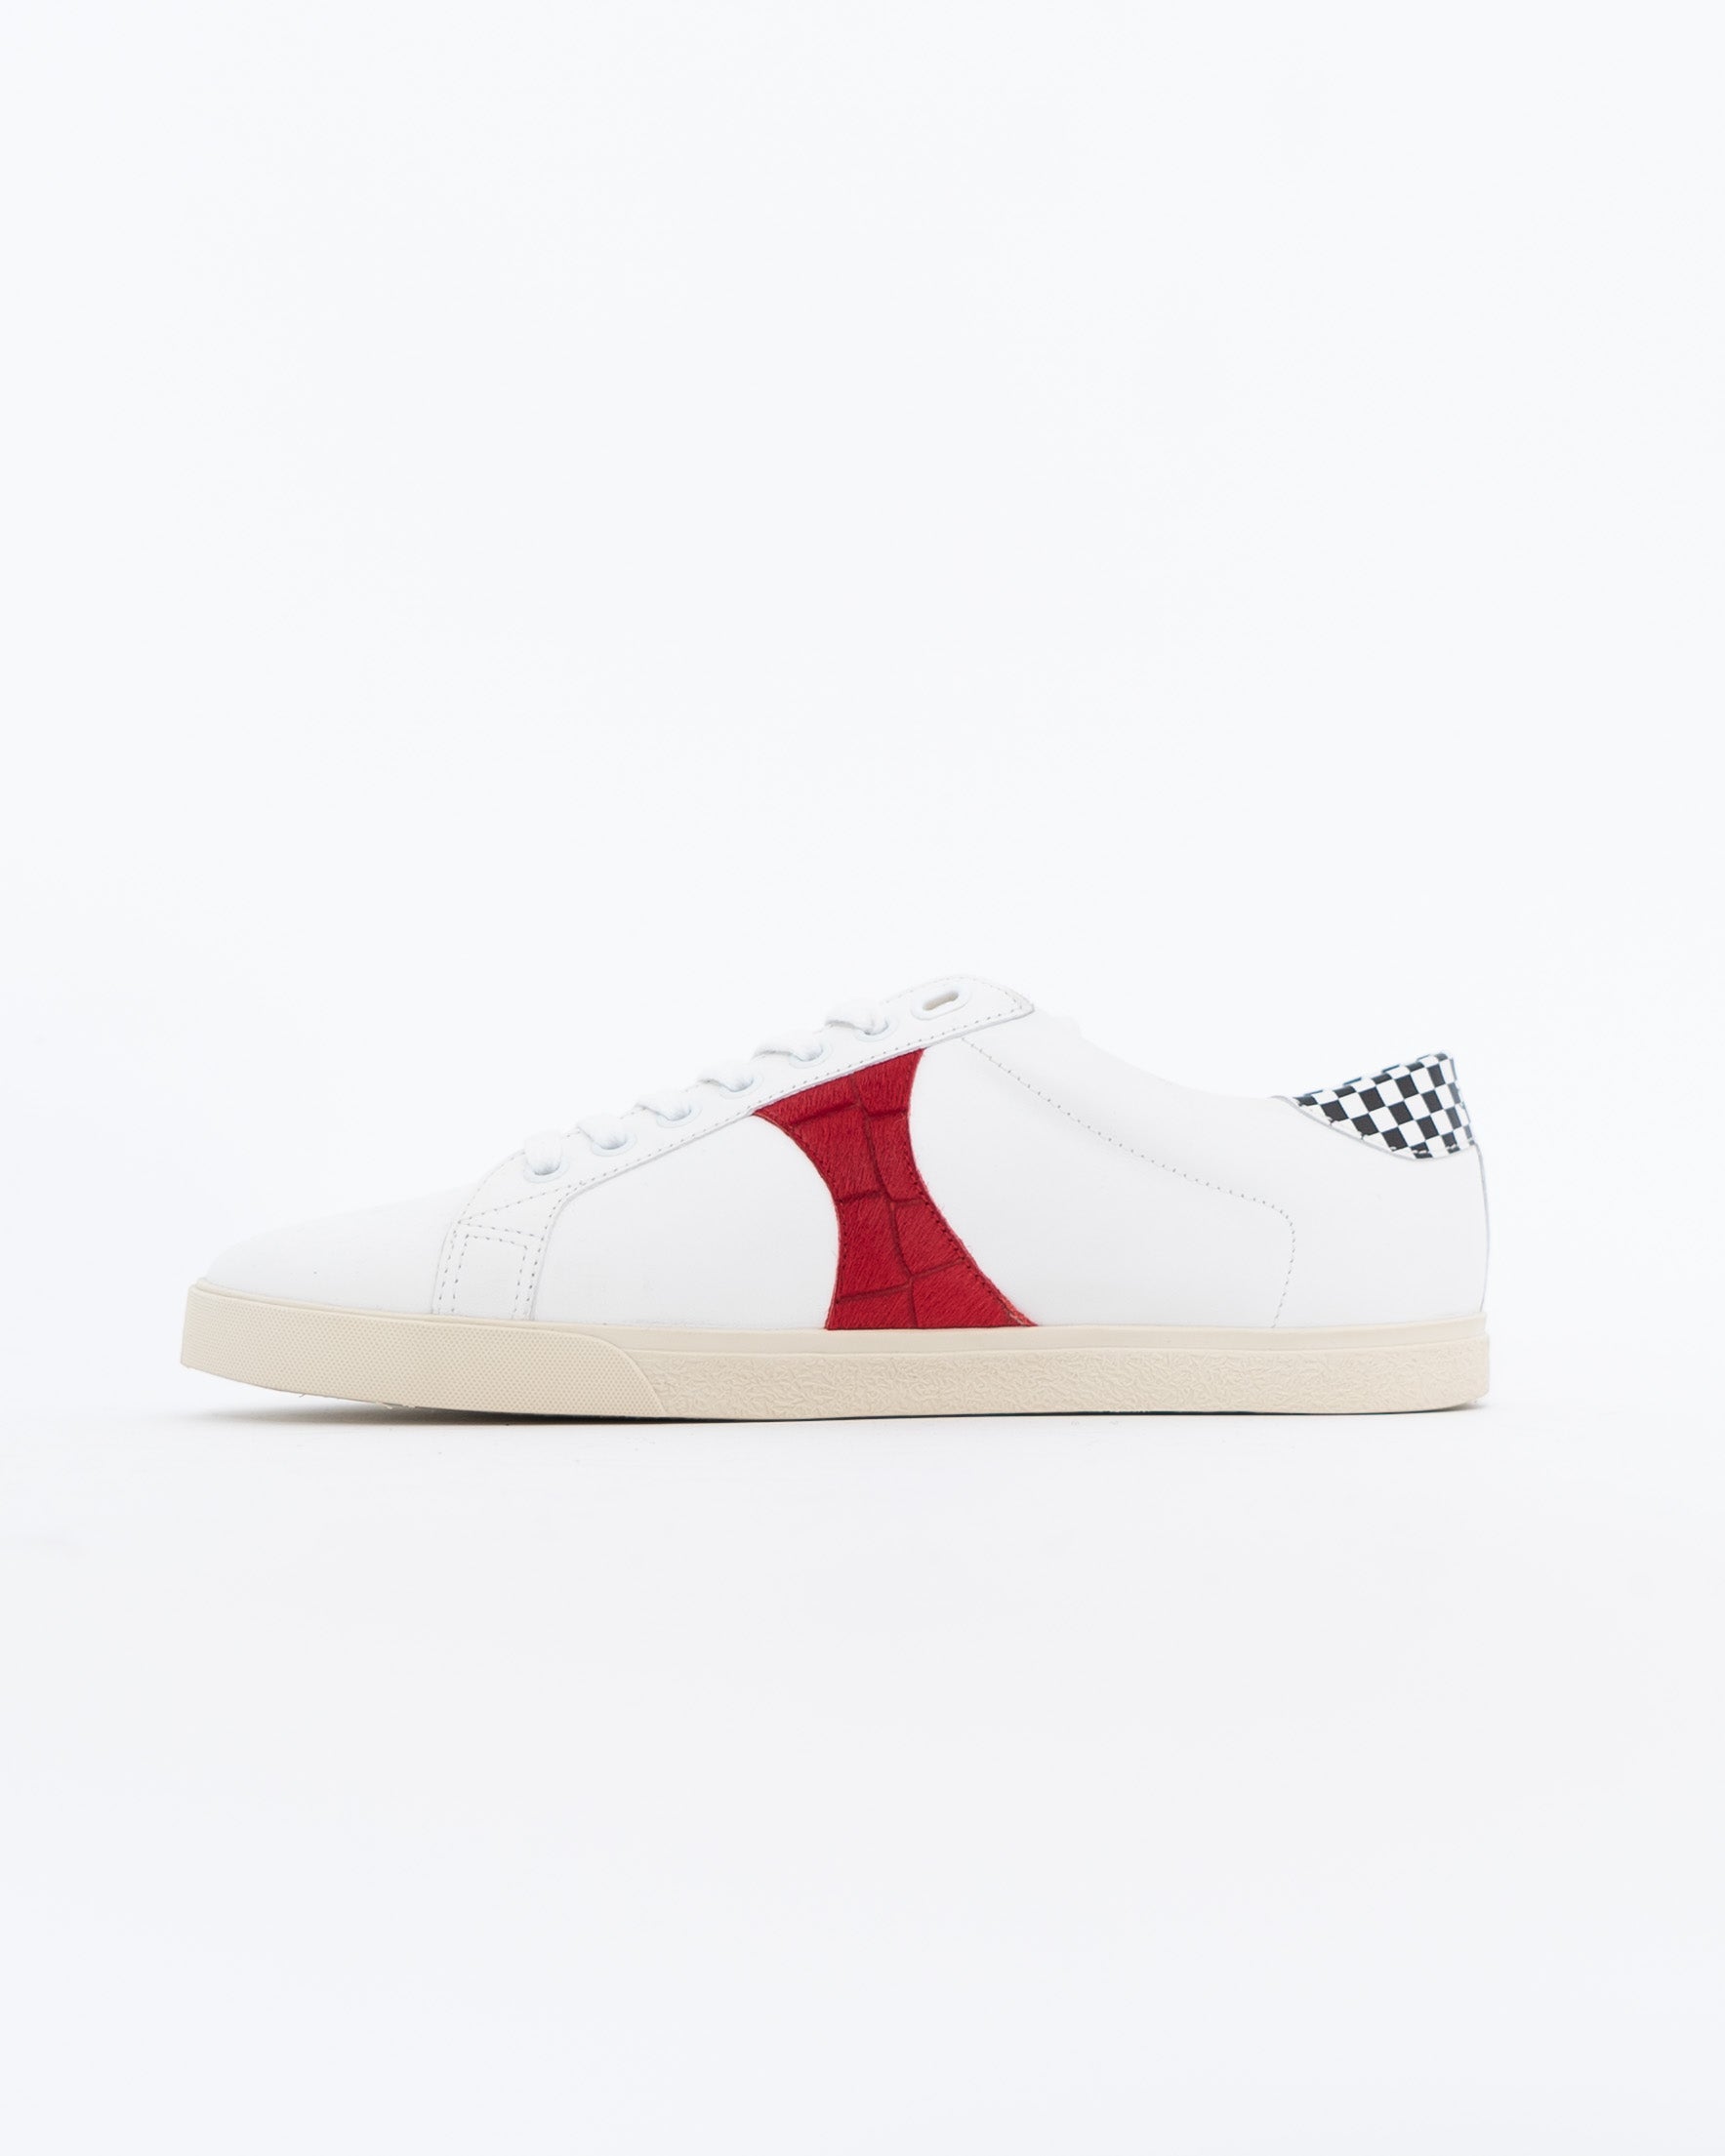 SS19 Checked Detail Triomphe Sneaker